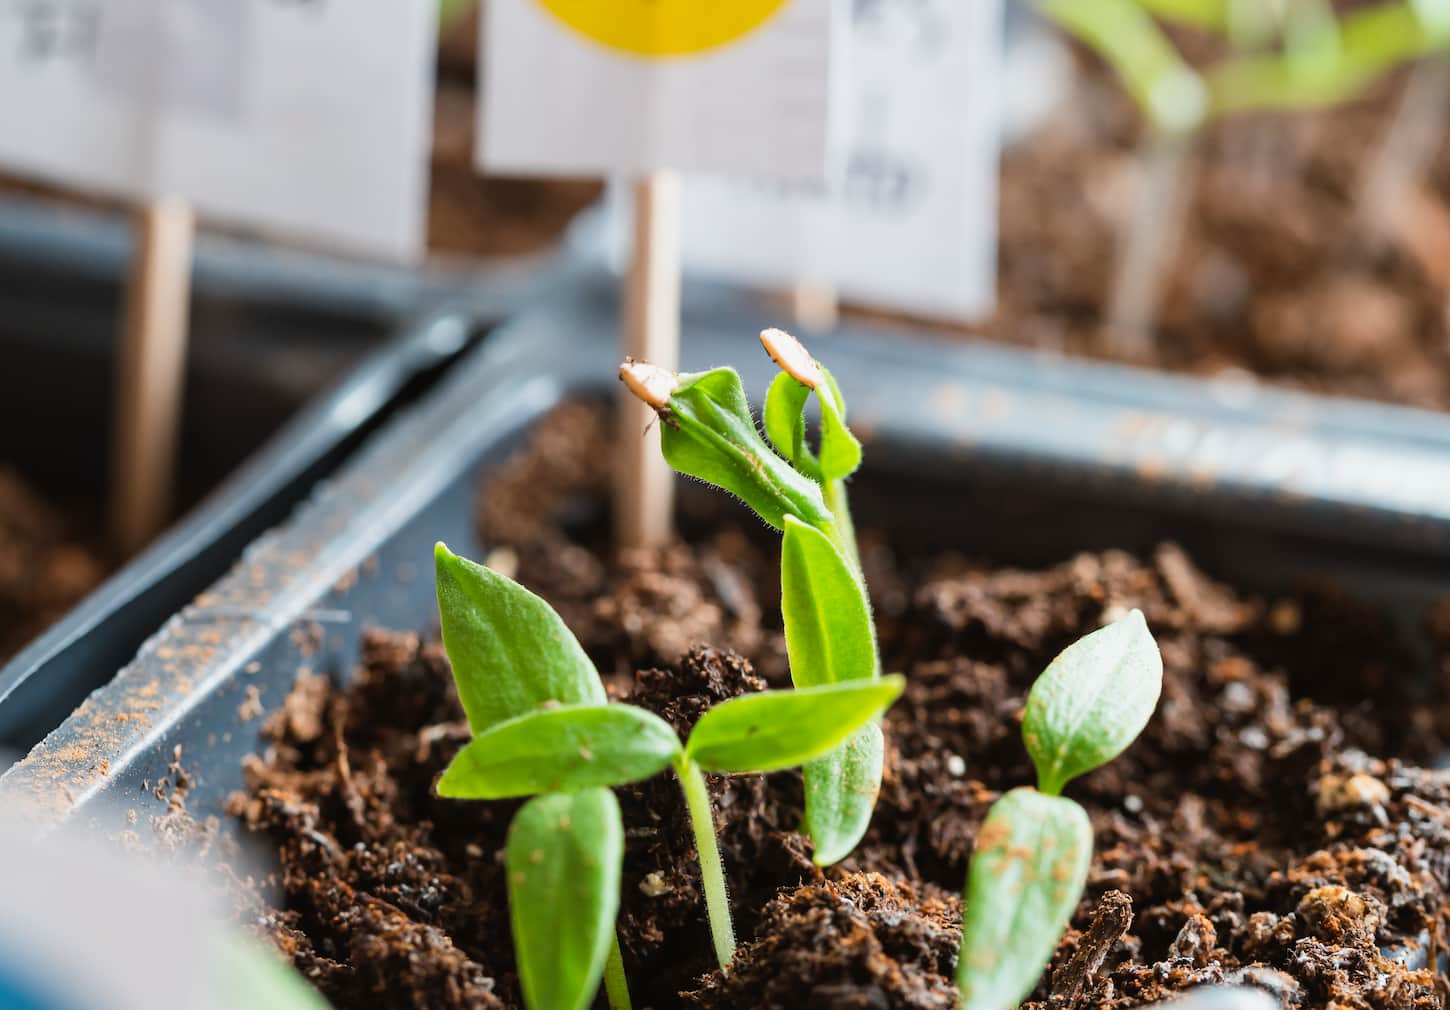 An image of Young bell peppers growing from seeds in an indoor garden.